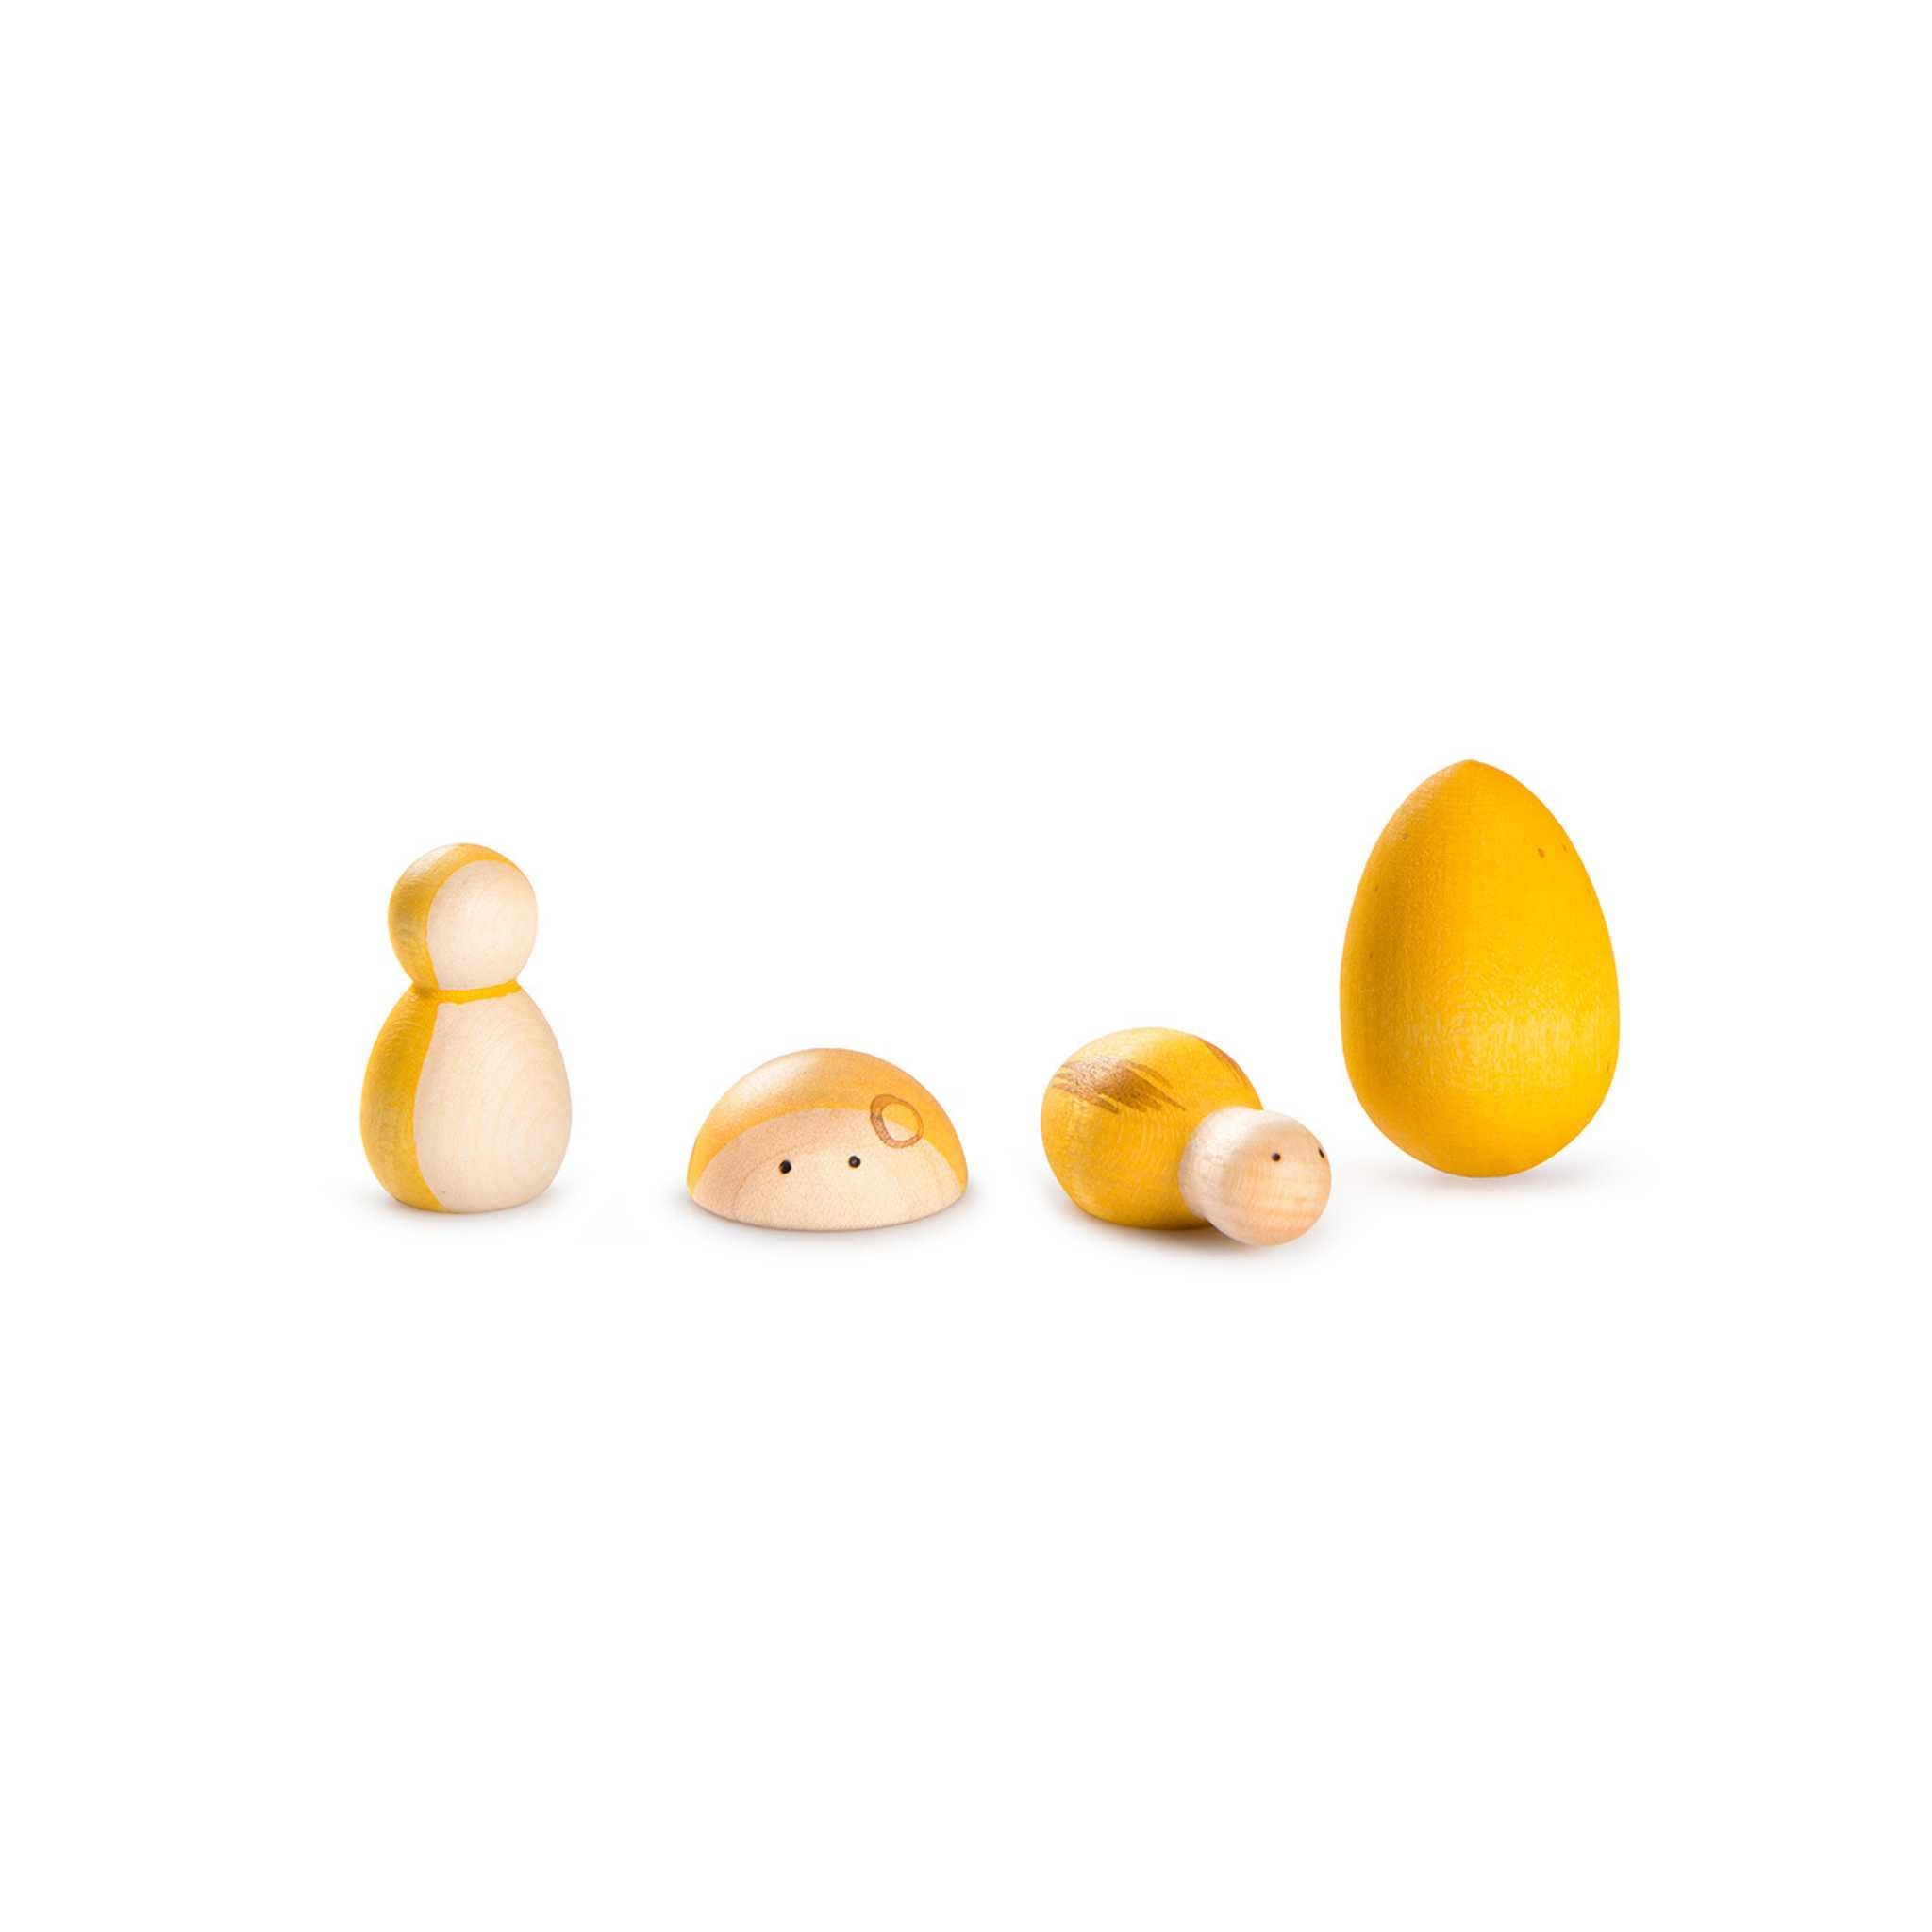 4 Yellow Wooden Toys From Grapat Lucky Lucky Collection on White Background